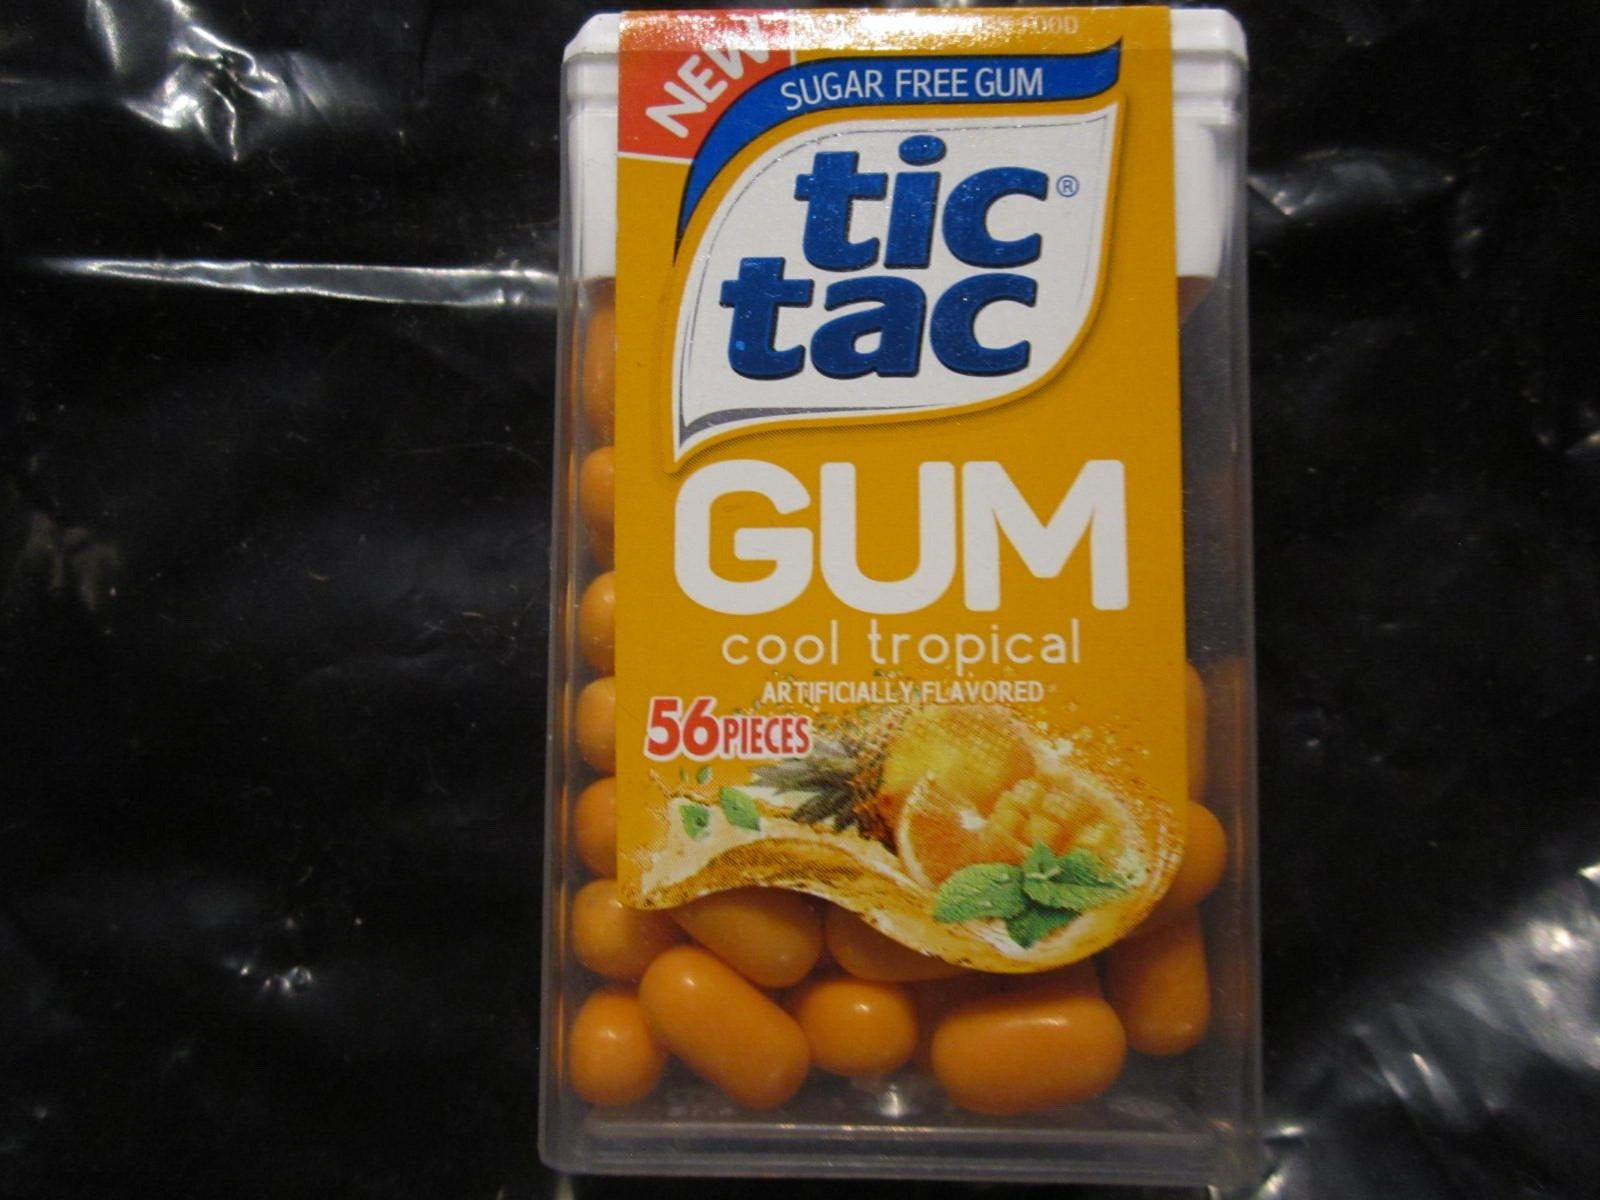 Tic Tac Gum Cool Tropical one sealed Collector Pack 56 Pieces of tic tac gum